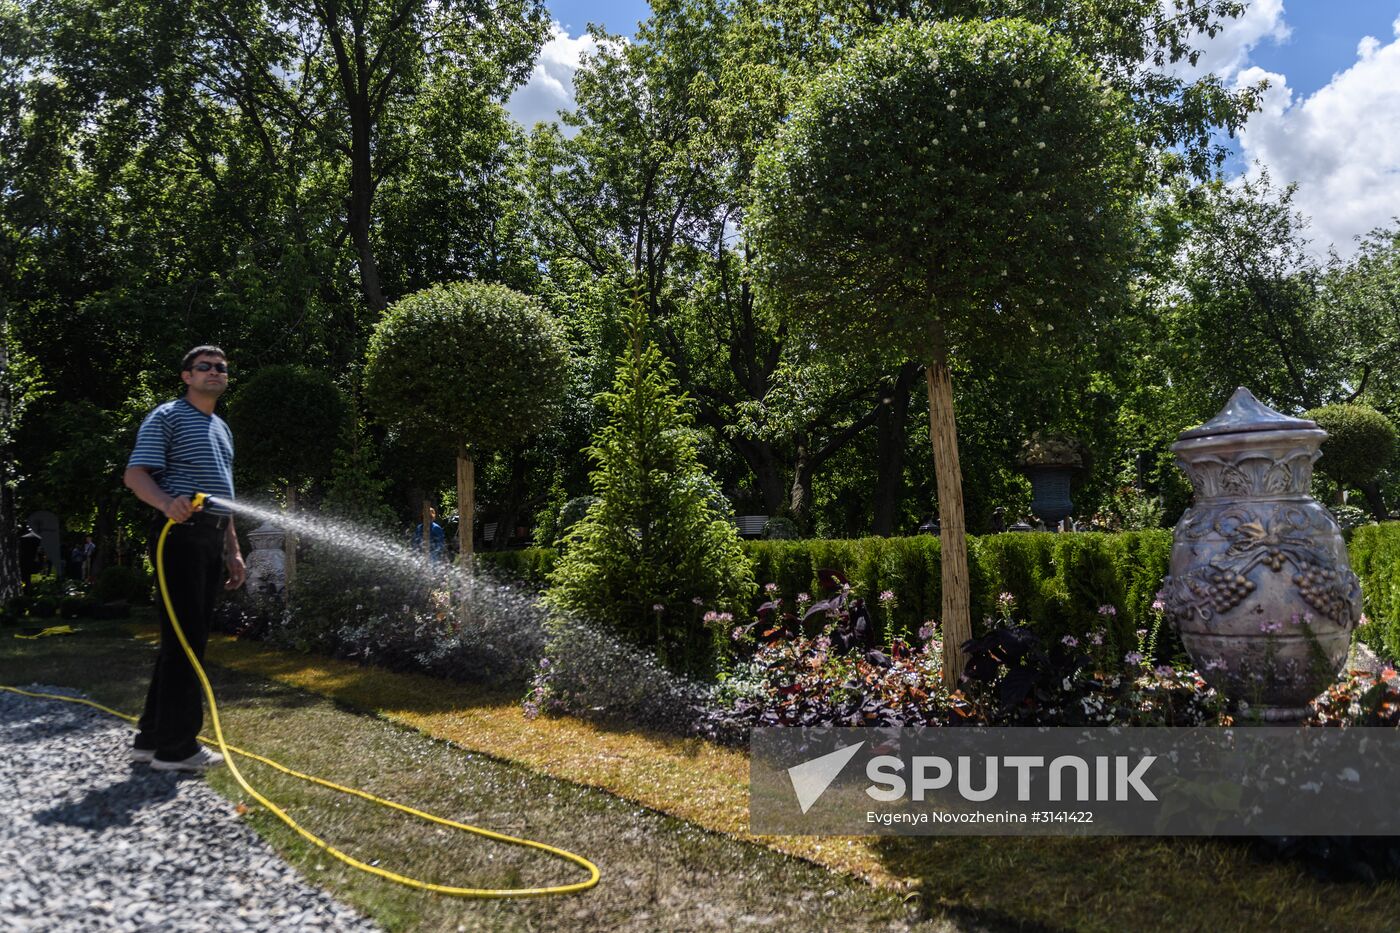 Sixth Moscow Flower Show in Muzeon Park